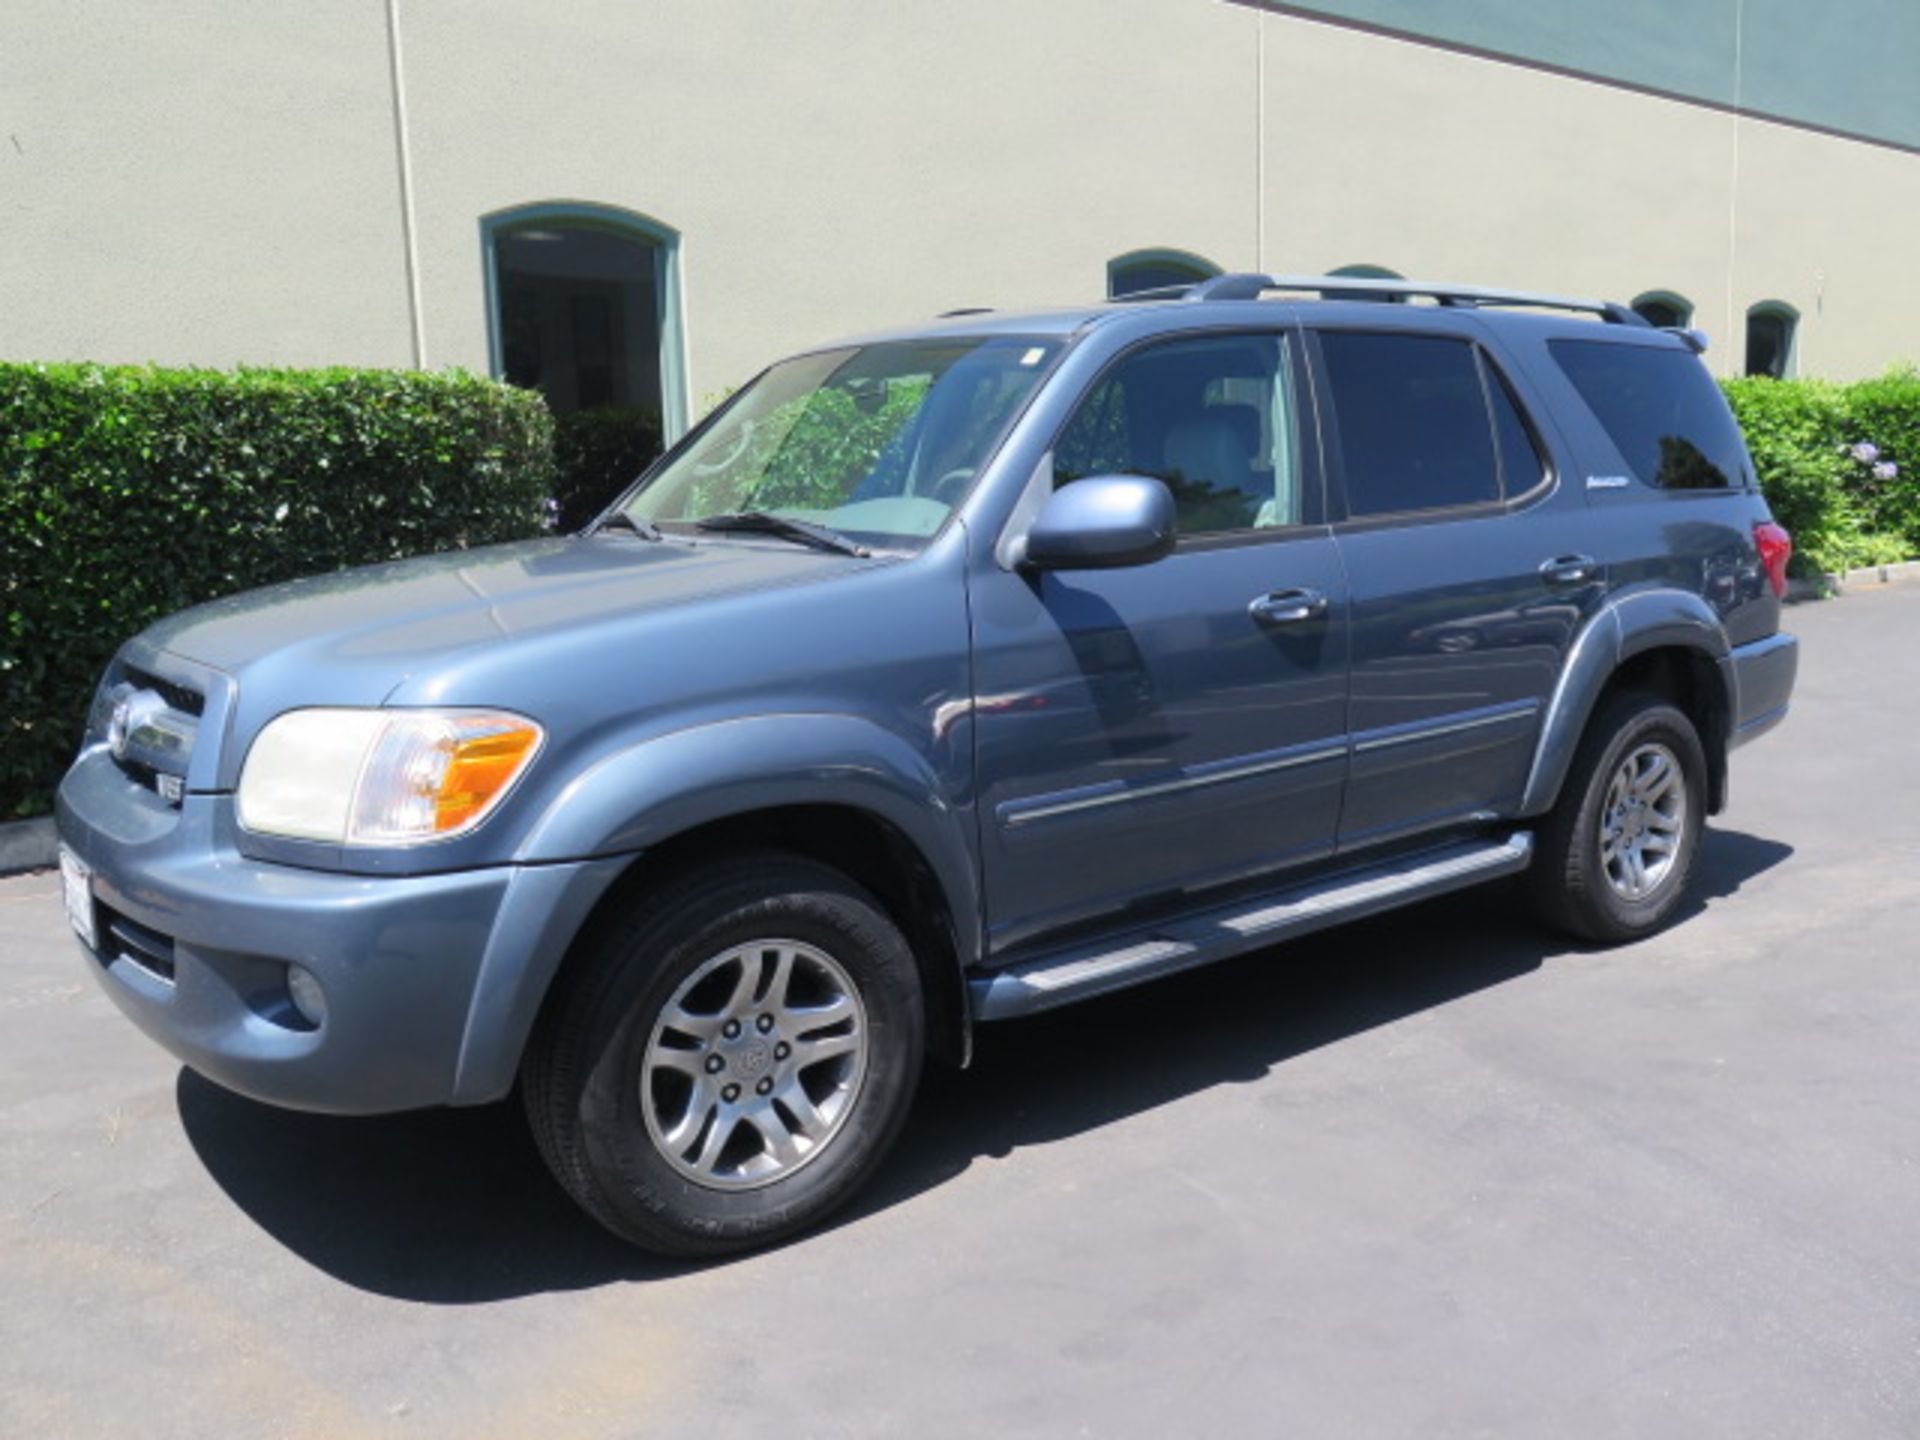 2005 Toyota Sequoia Limited SUV Lisc# 5NHN170 w/ 4.7L i-Force V8 Gas Engine, Automatic Trans, AC,